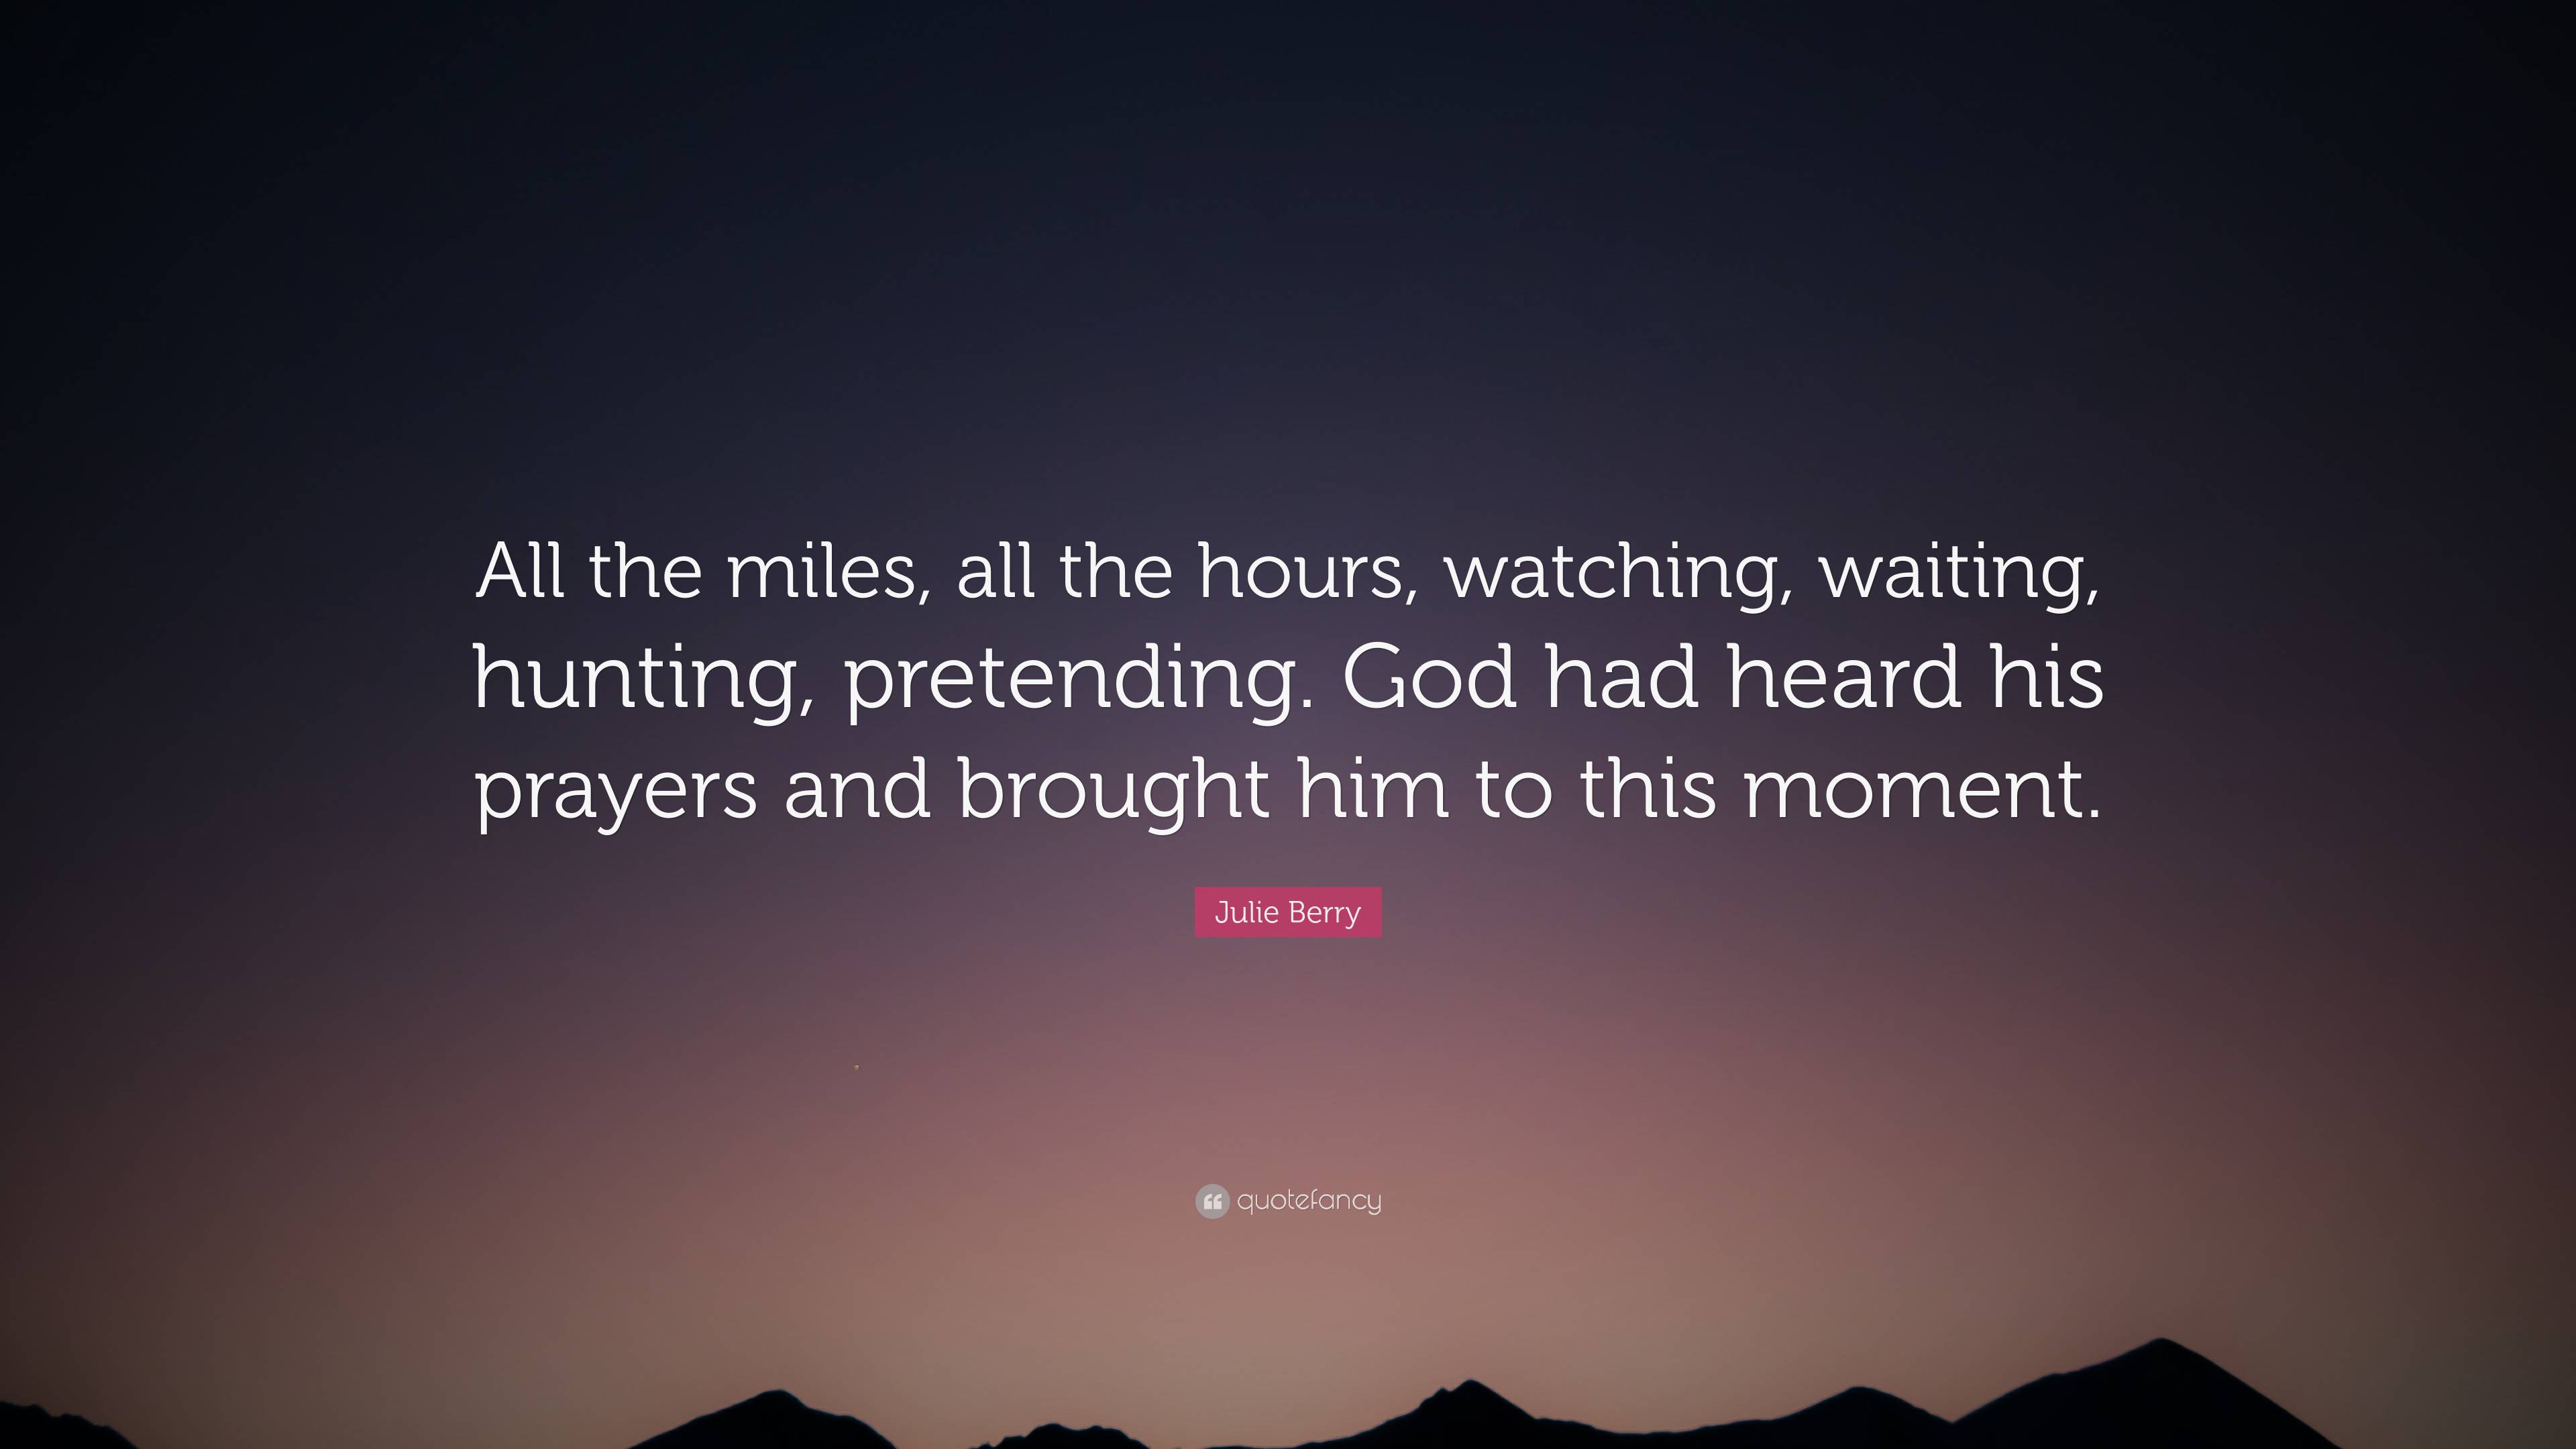 Julie Berry Quote: “All the miles, all the hours, watching, waiting,  hunting, pretending. God had heard his prayers and brought him to this ”